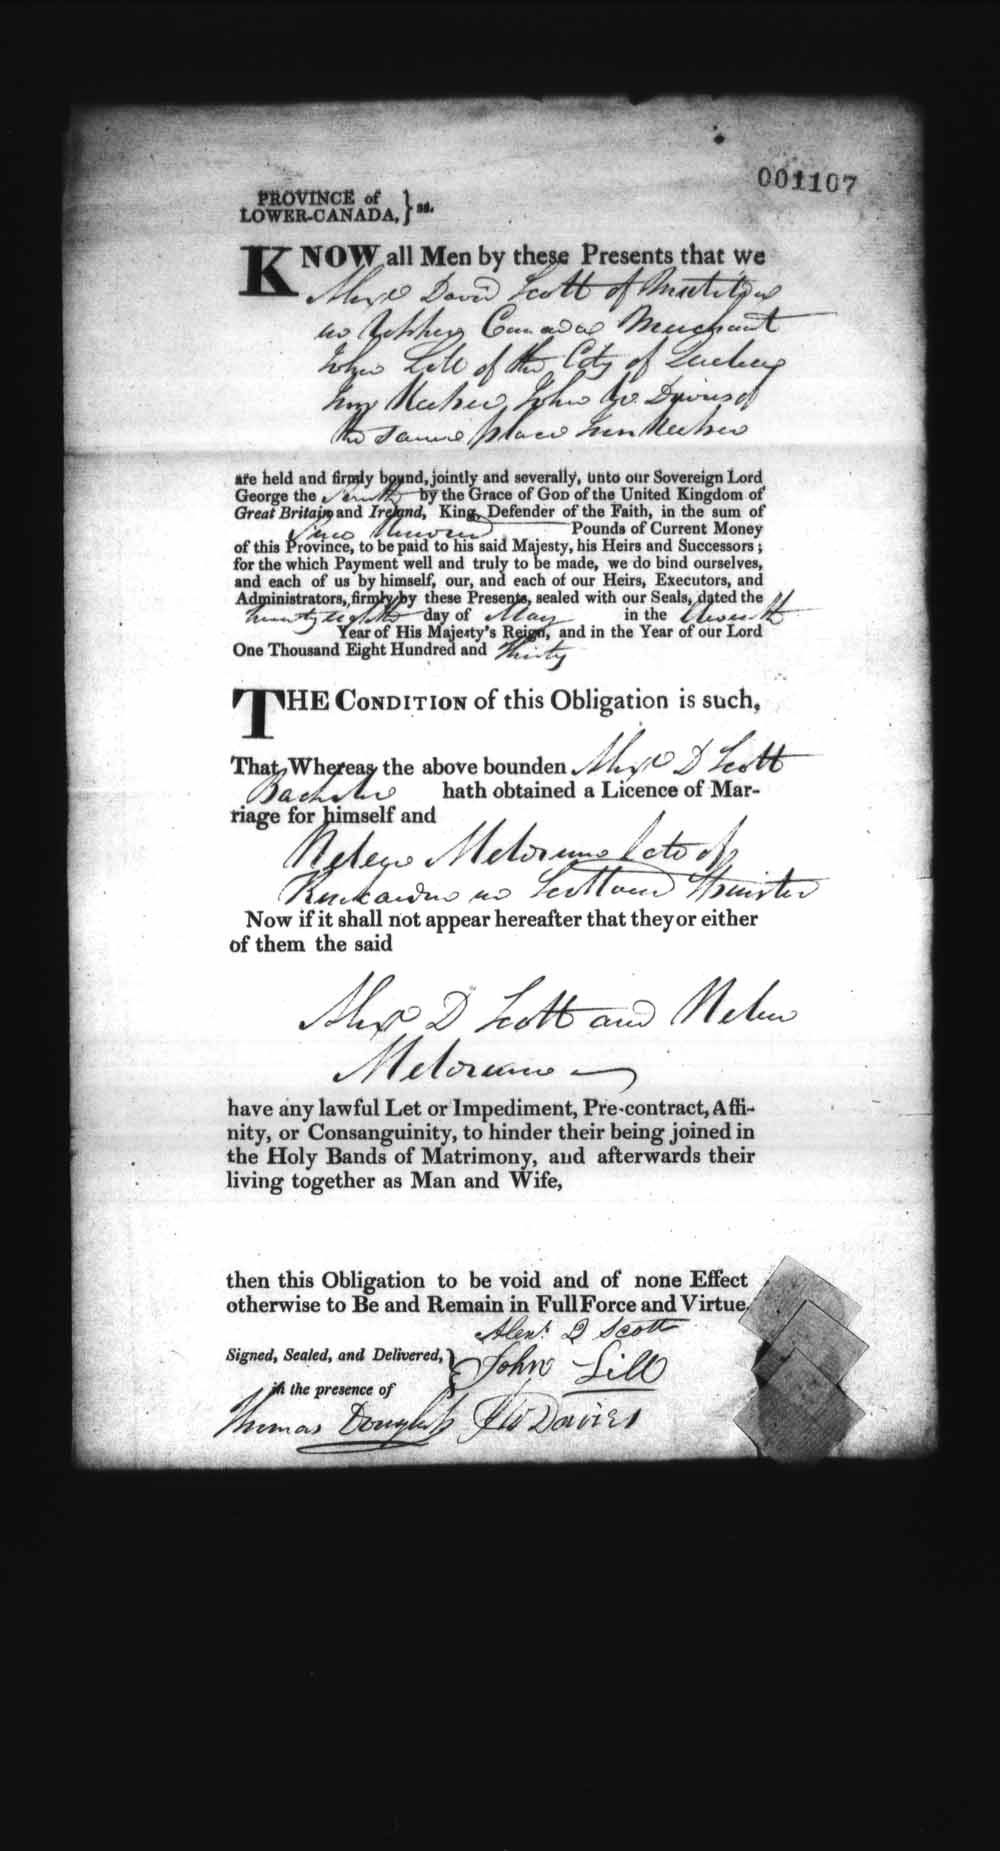 Digitized page of Upper and Lower Canada Marriage Bonds (1779-1865) for Image No.: e008237248